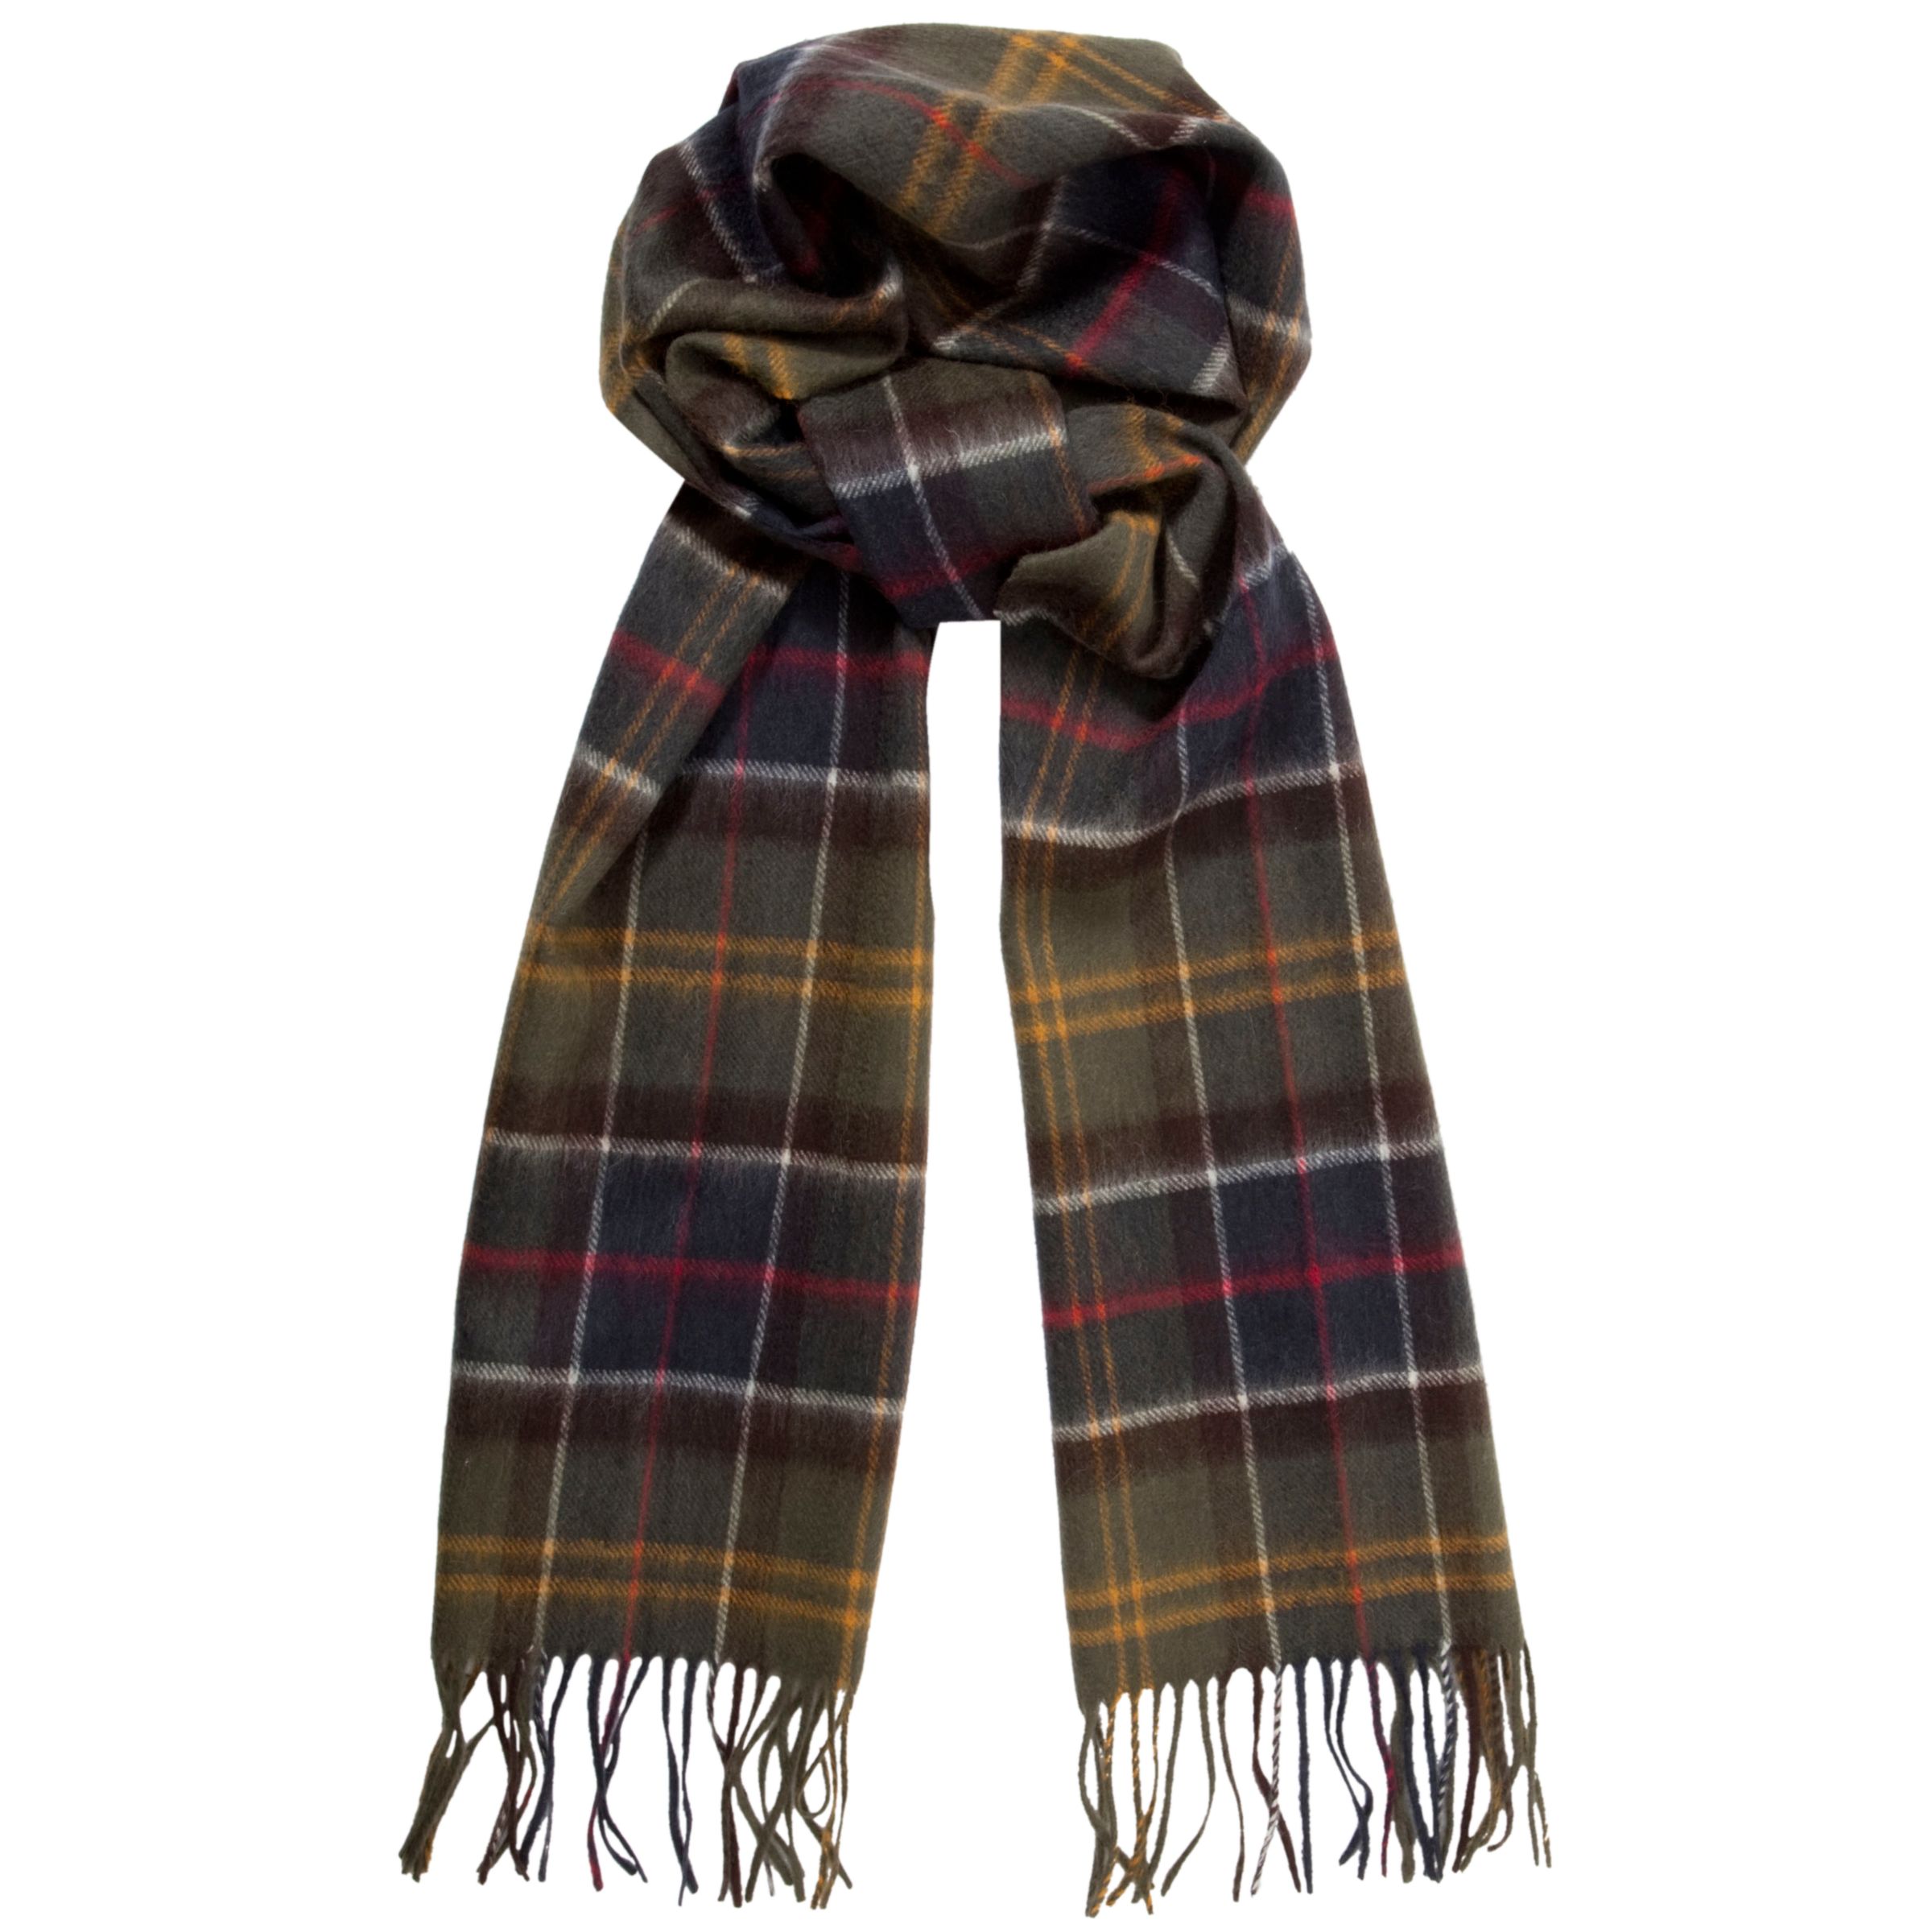 barbour lambswool and cashmere scarf